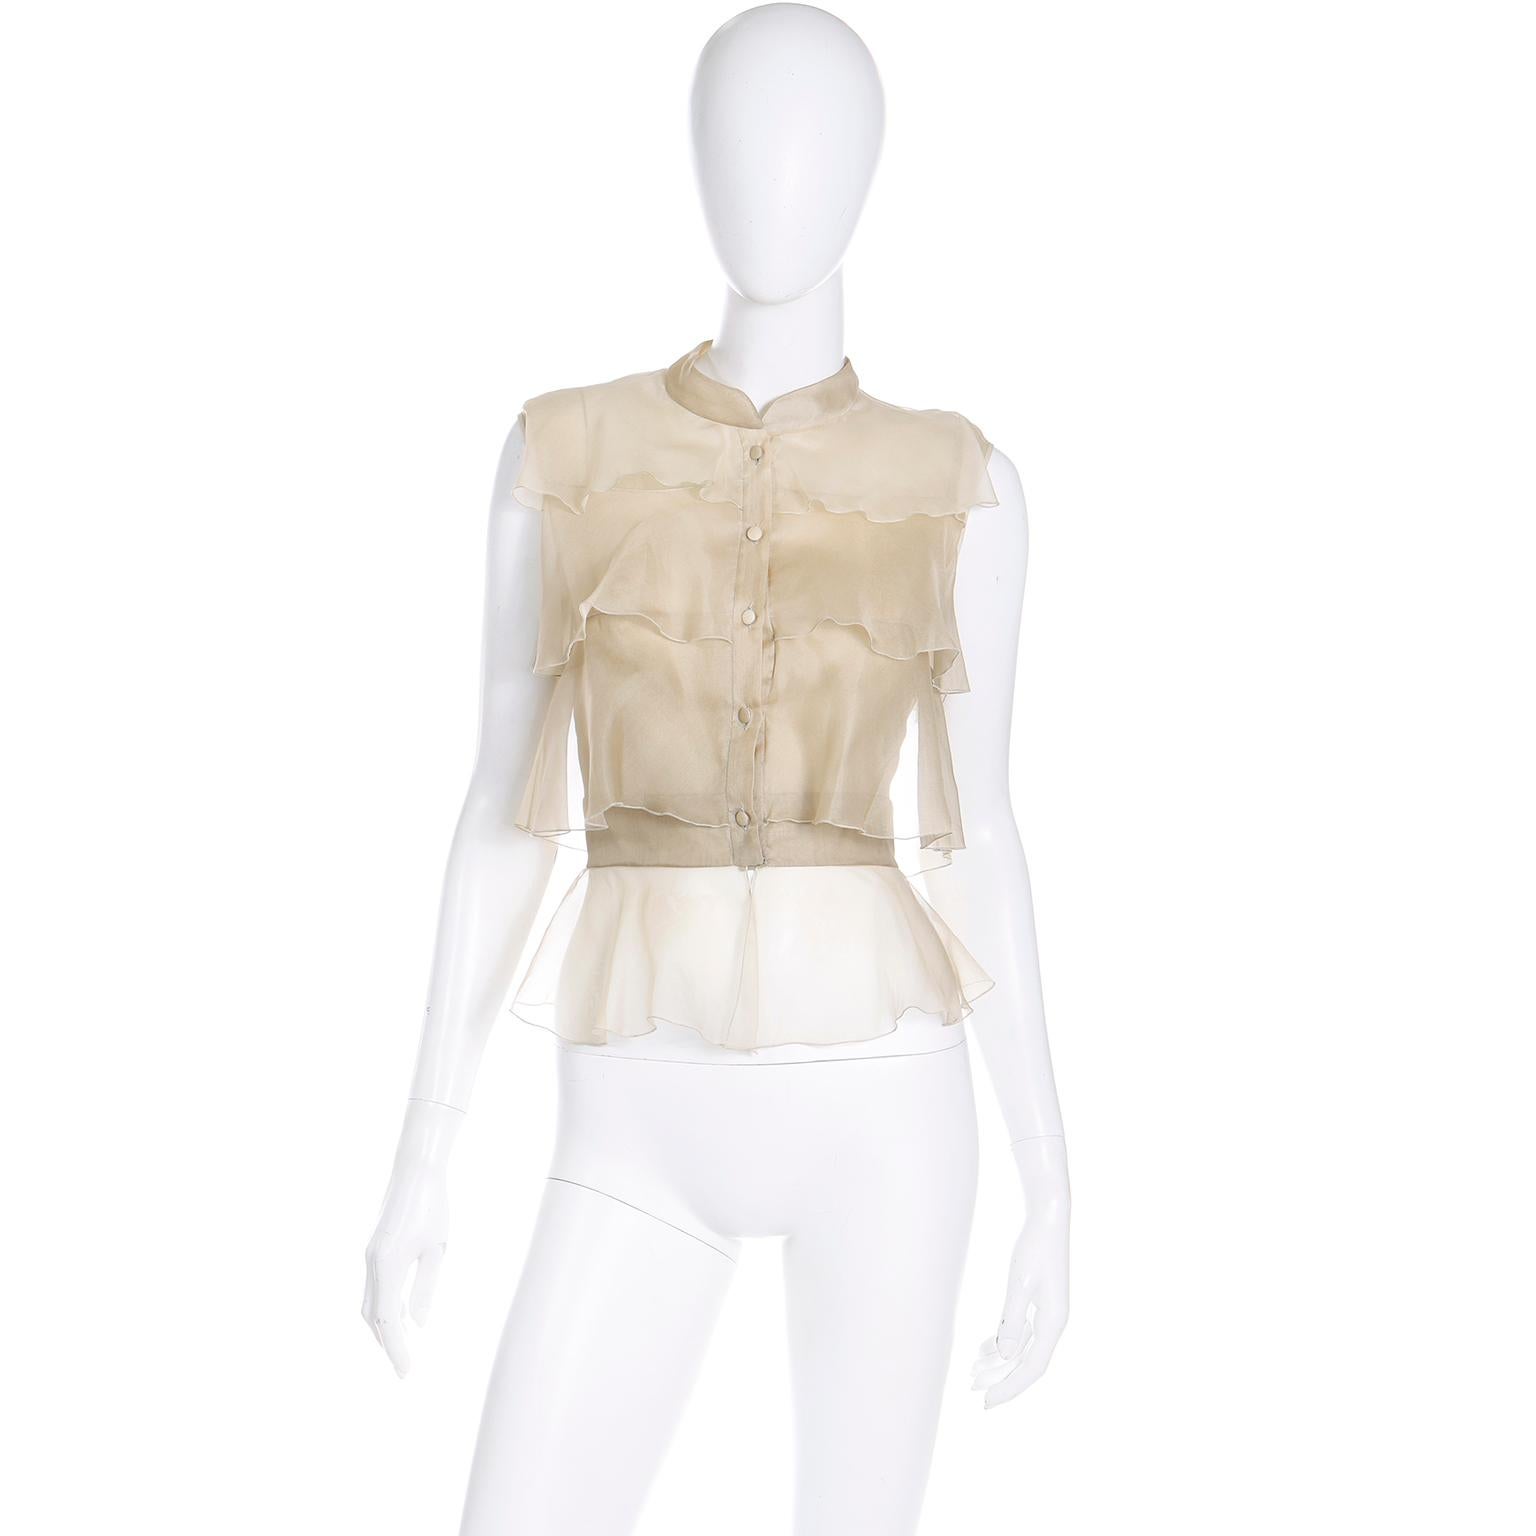 This is a luxurious 2000s sleeveless soft gold Valentino Garavani tiered sleeveless blouse with delicate semi sheer ruffles in an exquisite fine silk chiffon. Tailored to perfection, this top is a timeless piece that will elevate any